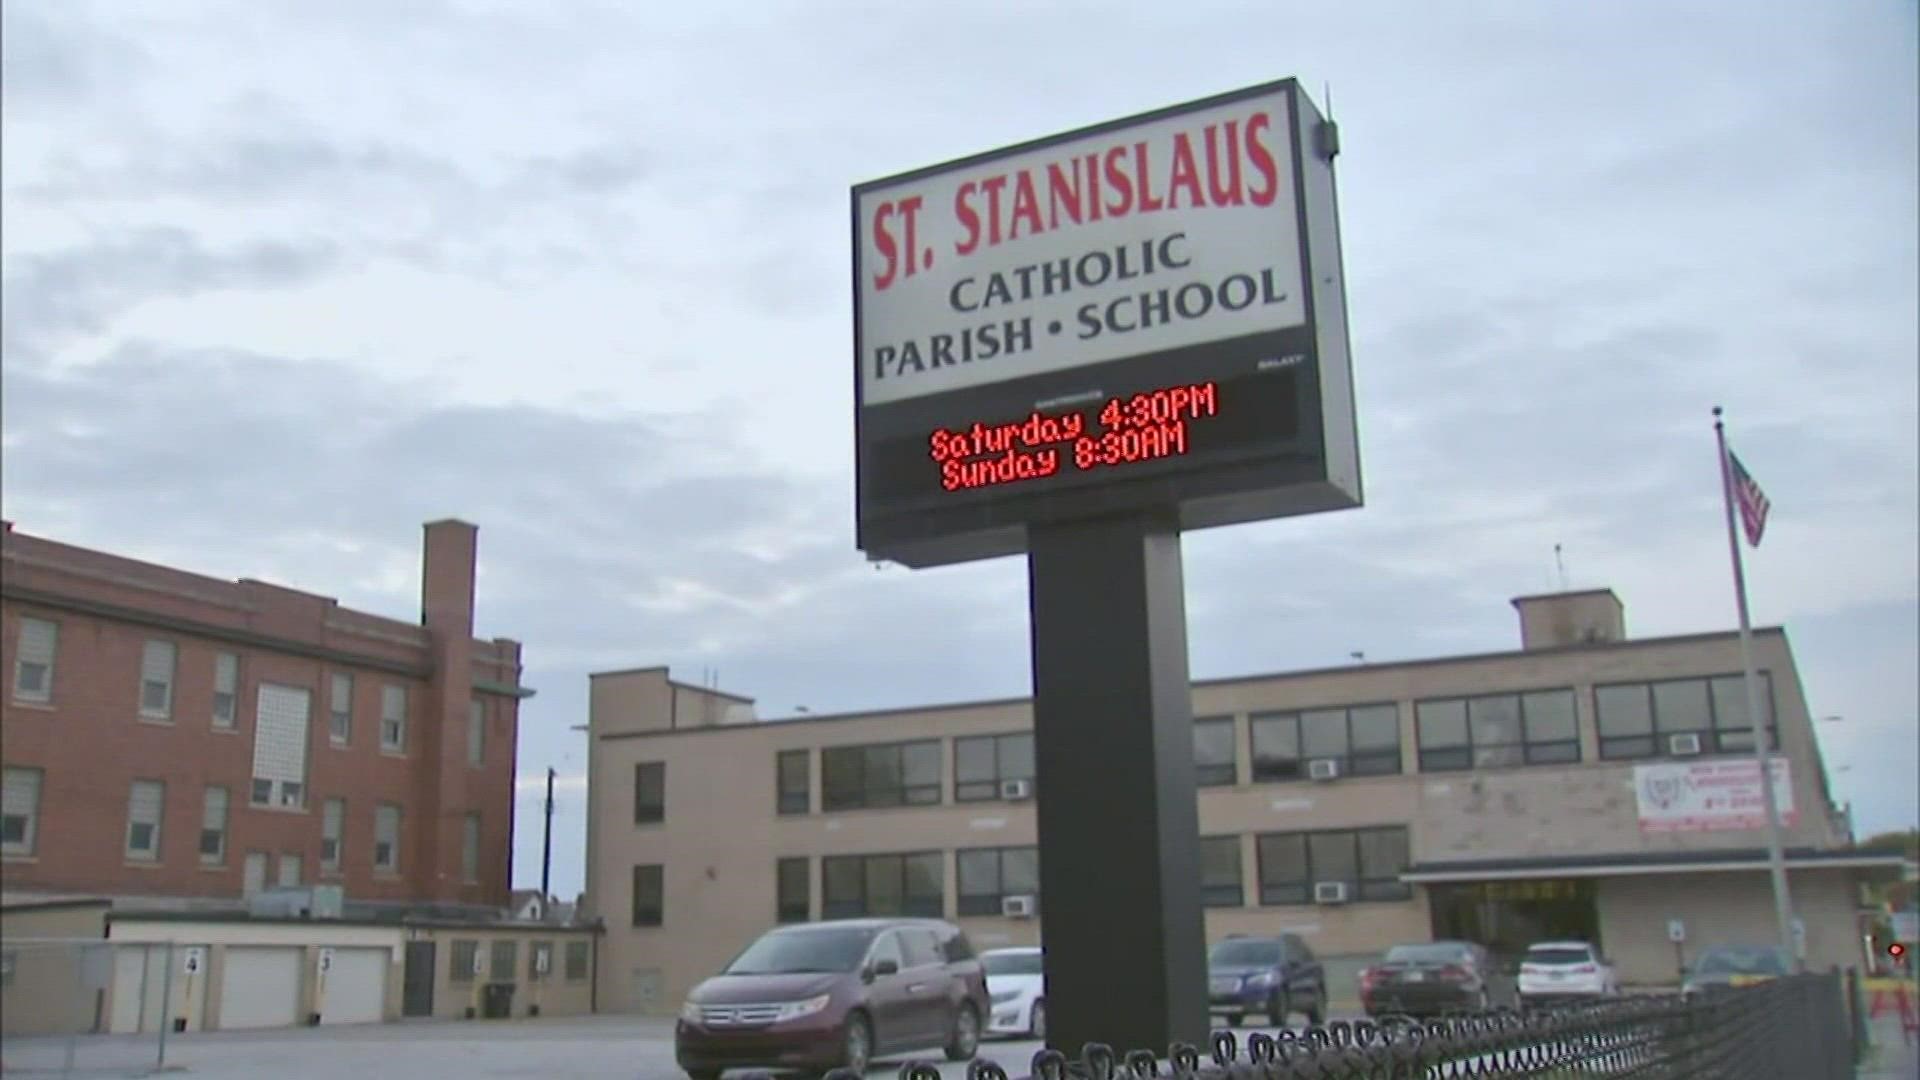 The 5th grade teacher told students she had a "kill list" that included at least one student.